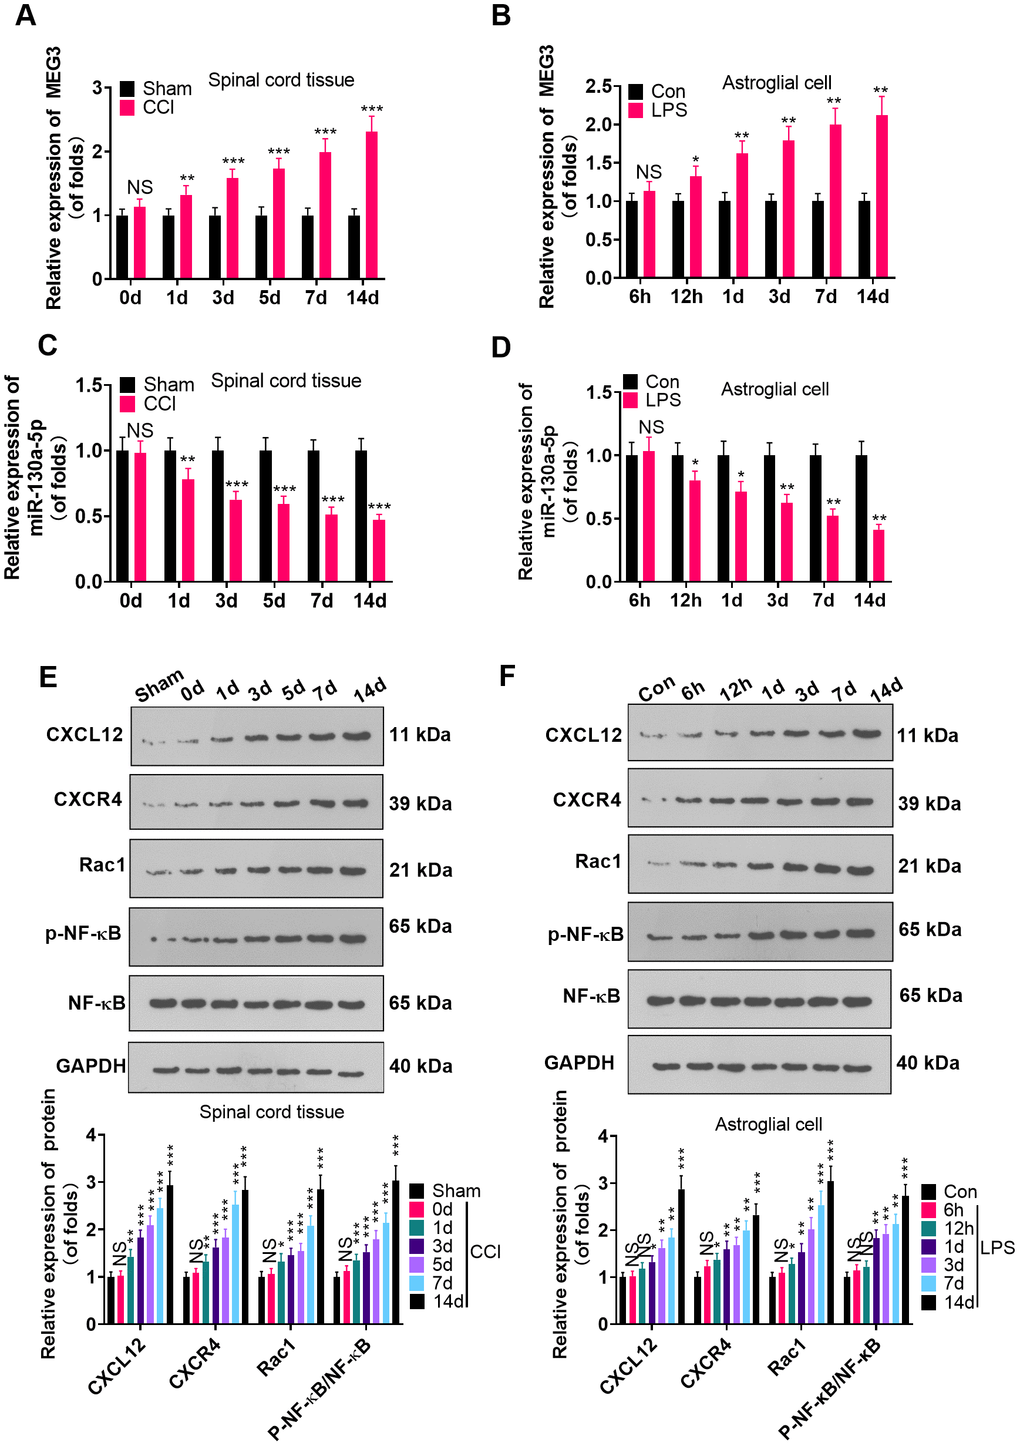 MEG3 was overexpressed and miR-130a-5p was knocked down in CCI rats. (A, B) The expression of MEG3 in the L4-L6 dorsal spinal cord of CCI rats and astrocytes was assayed by RT-qPCR 0, 1, 3, 5, 7, and 14 days after CCI and 6 hours, 12 hours, 1 day, 3 days, 7 days, and 14 days after LPS induction of astrocytes, respectively. (C, D) Expression of miR-130a-5p in CCI rats and astrocytes was measured by RT-qPCR at 0, 1, 3, 5, 7, and 14 days after CCI and 6 hours, 12 hours, 1 day, 3 days, 7 days, and 14 days after LPS induction of astrocytes, respectively. (E, F) Expression of CXCL12/CXCR4 and its downstream Rac1 and NF-κB in the dorsal spinal cord of CCI rats and astrocytes at 0, 1, 3, 5, 7, and 14 days and LPS-induced astrocytes at 6 hours, 12 hours, 1 day, 3 days, 7 days, and 14 days, respectively, was measured using WB. Data were expressed as mean±SD. n=5. NSP>0.05, *PPP